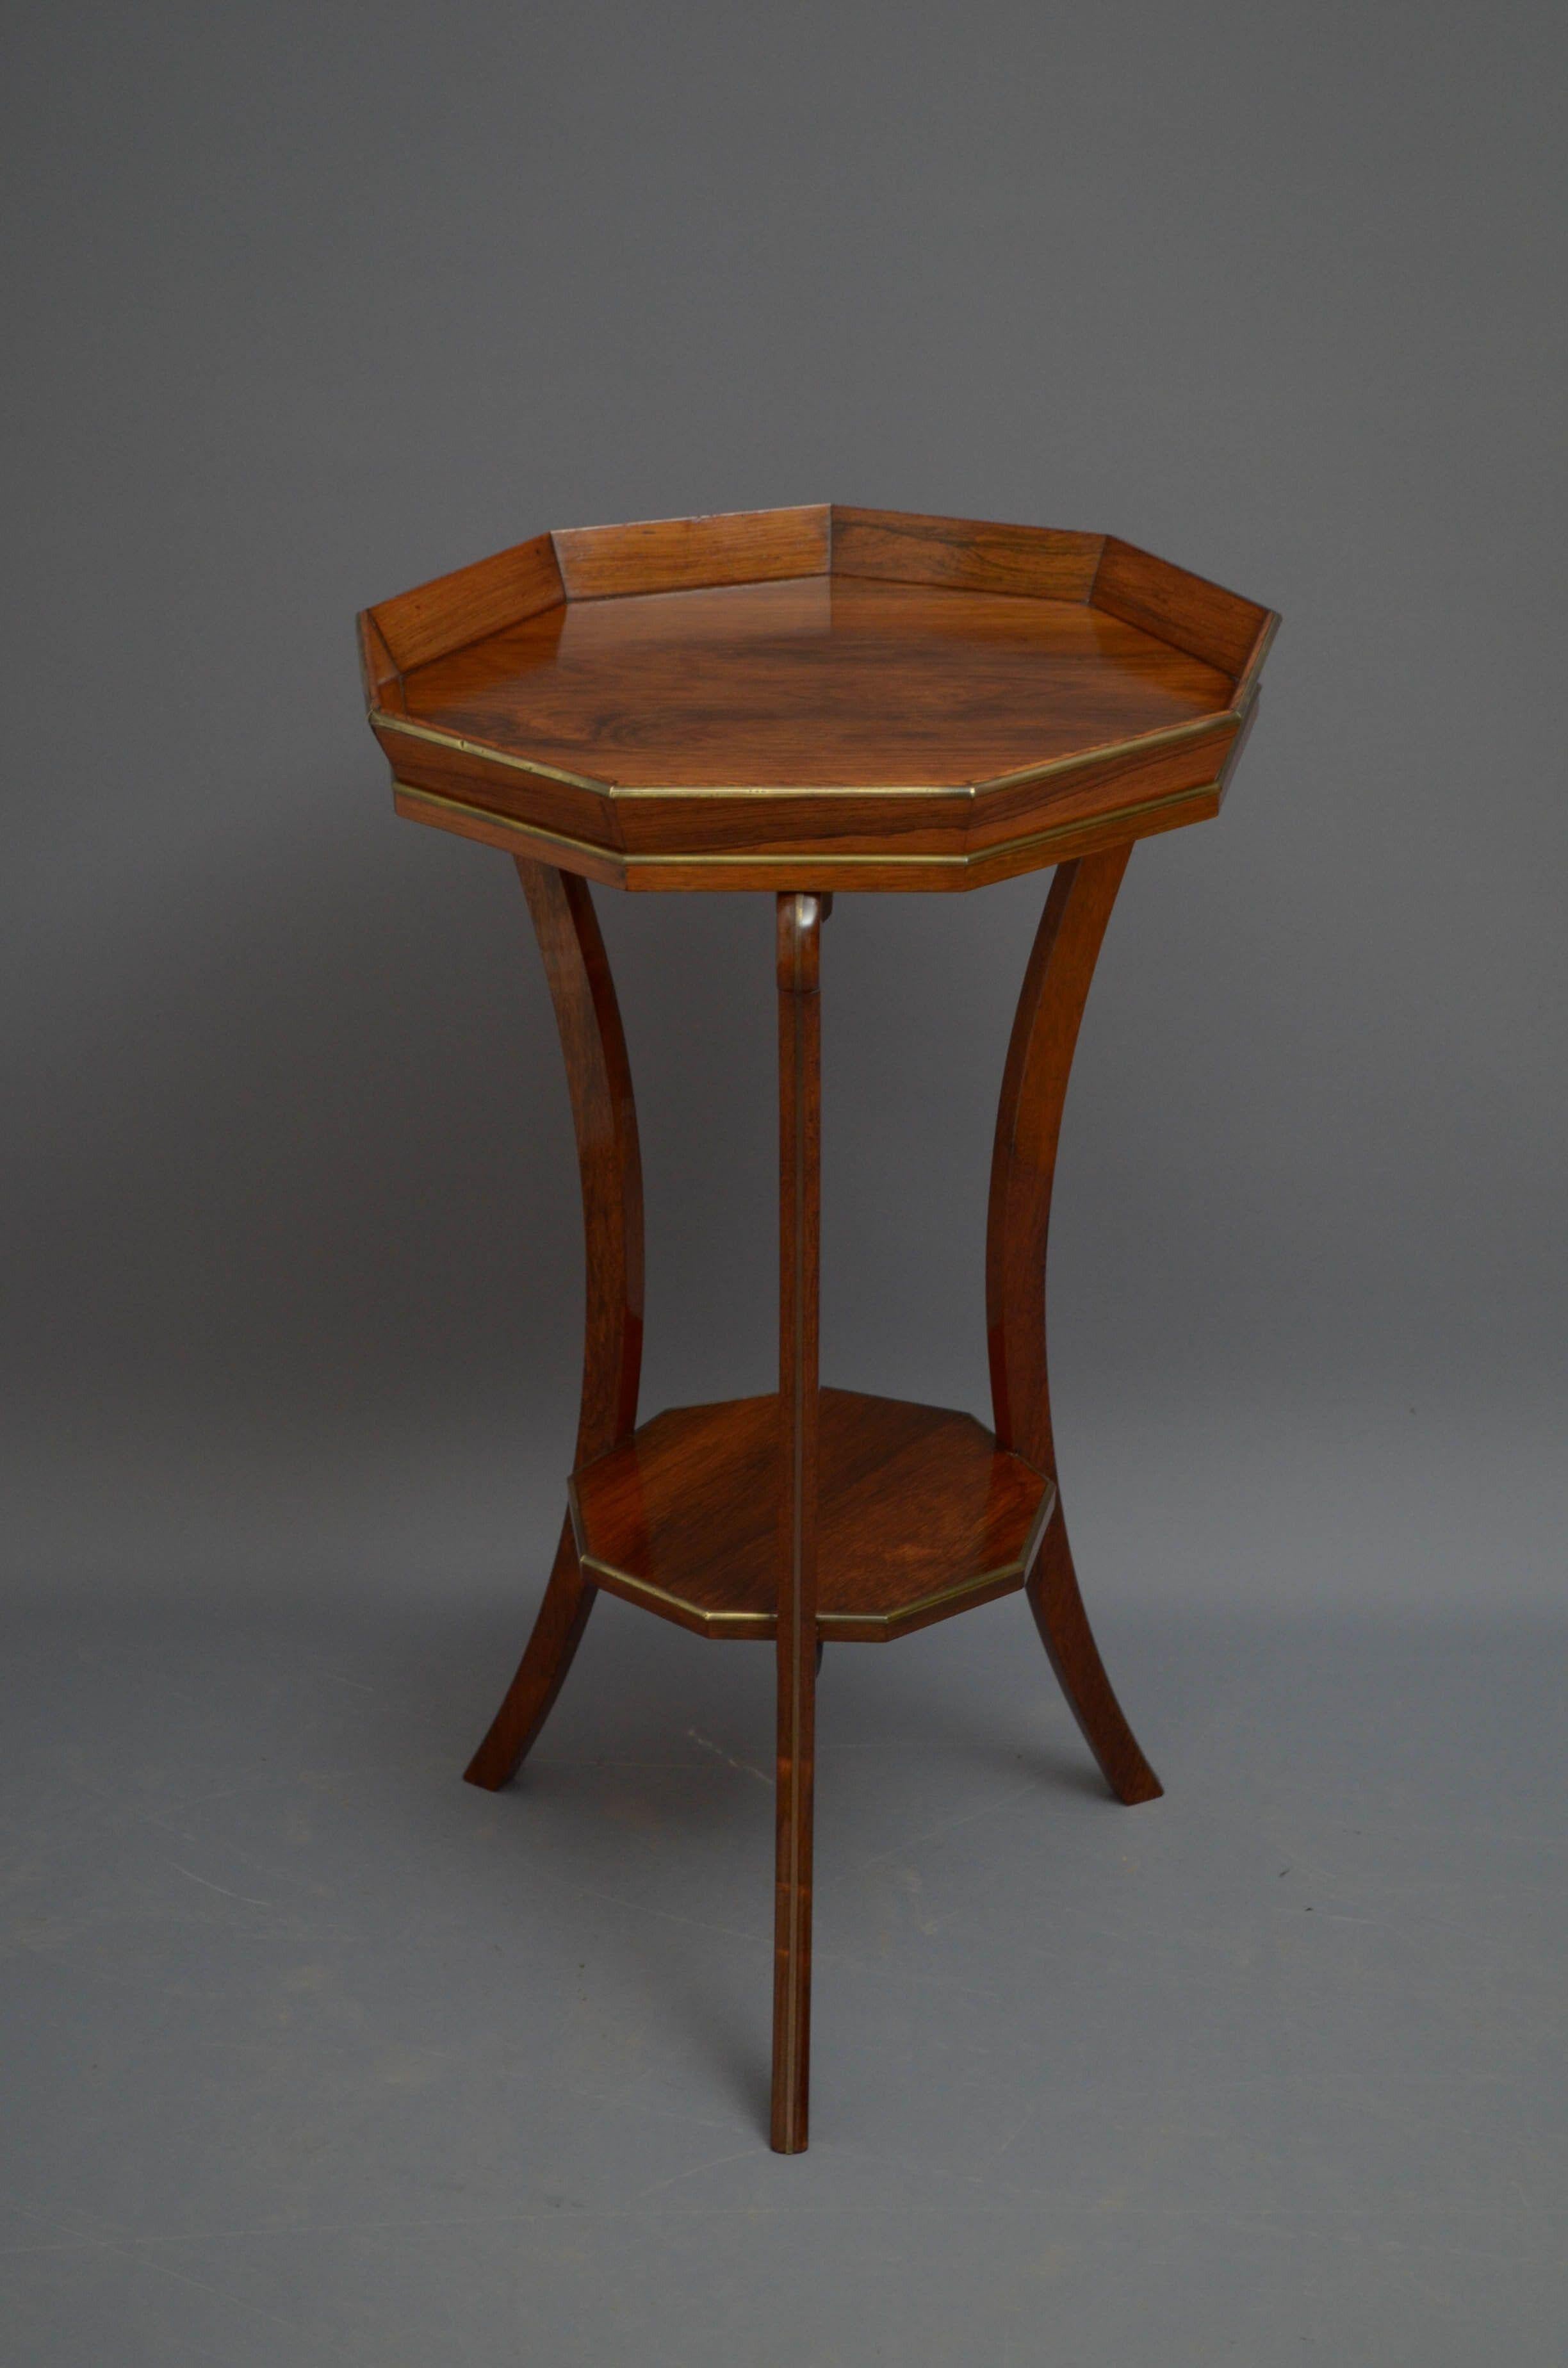 Regency Rosewood Occasional Table / Plant Stand In Good Condition For Sale In Whaley Bridge, GB